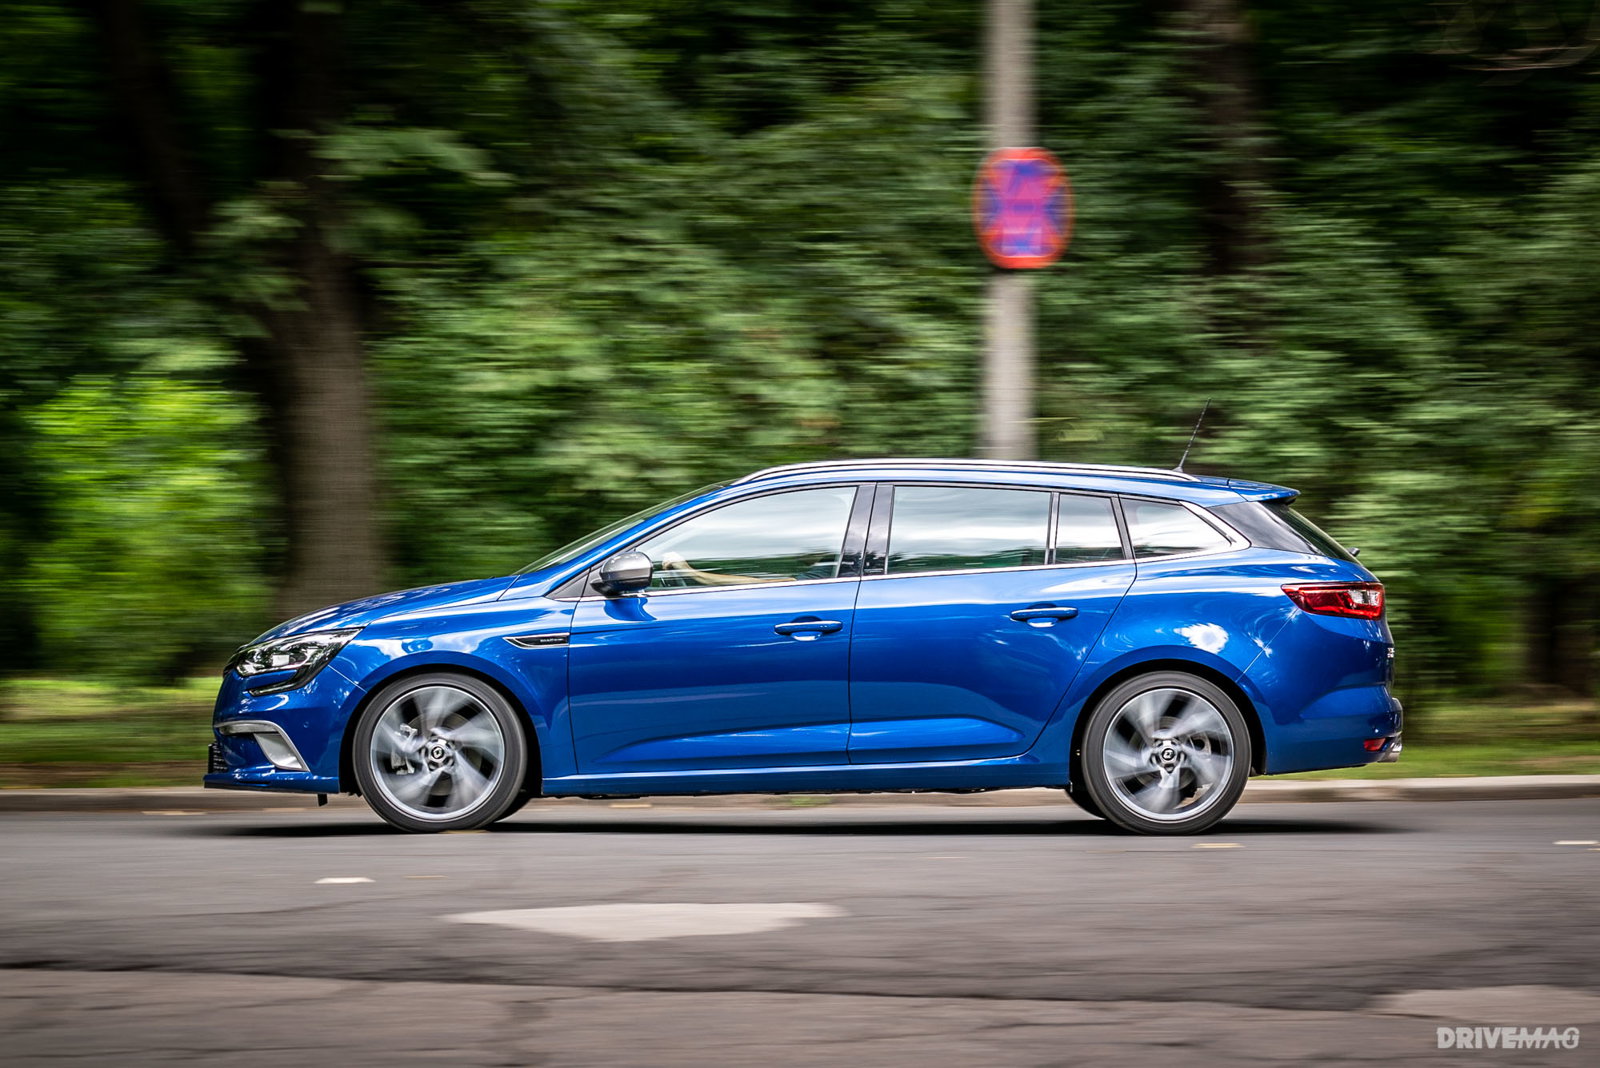 2018 Renault Megane GT review: the people's quickish wagon | DriveMag Cars